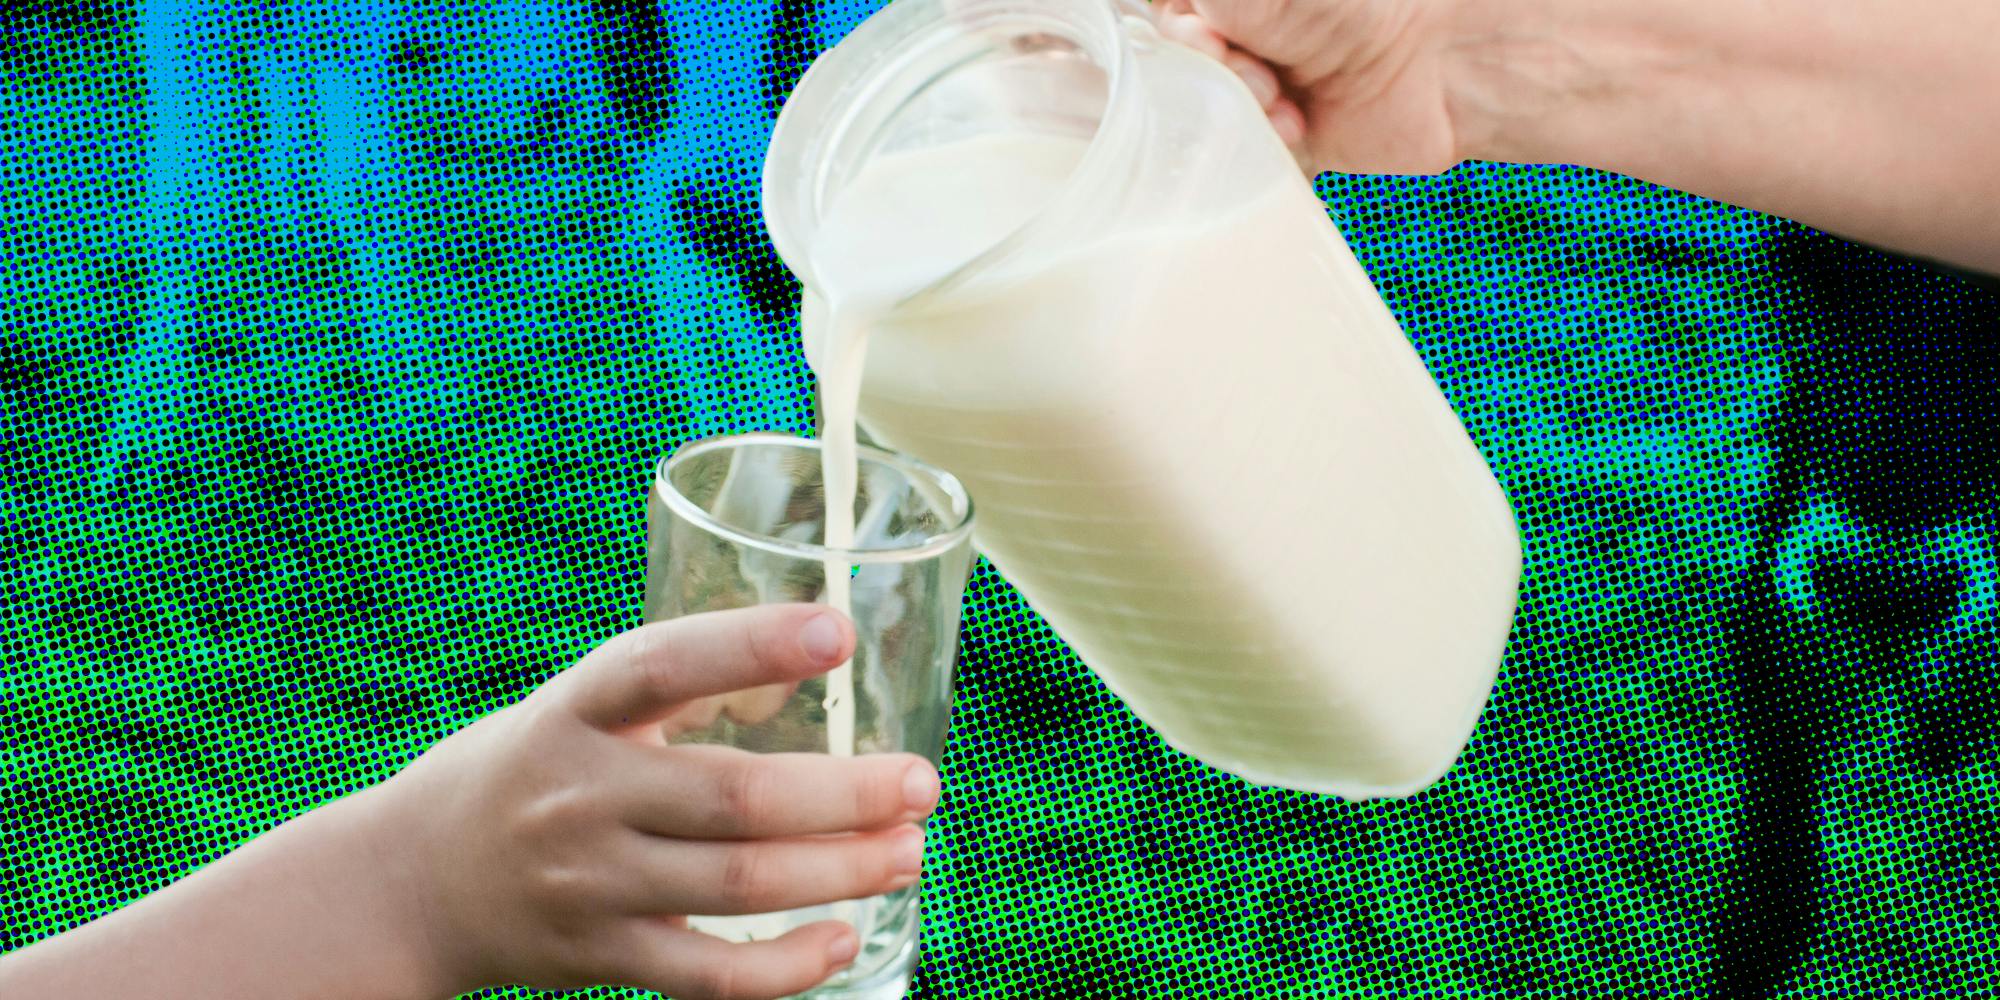 Hand pouring pitcher of milk into glass held by another hand